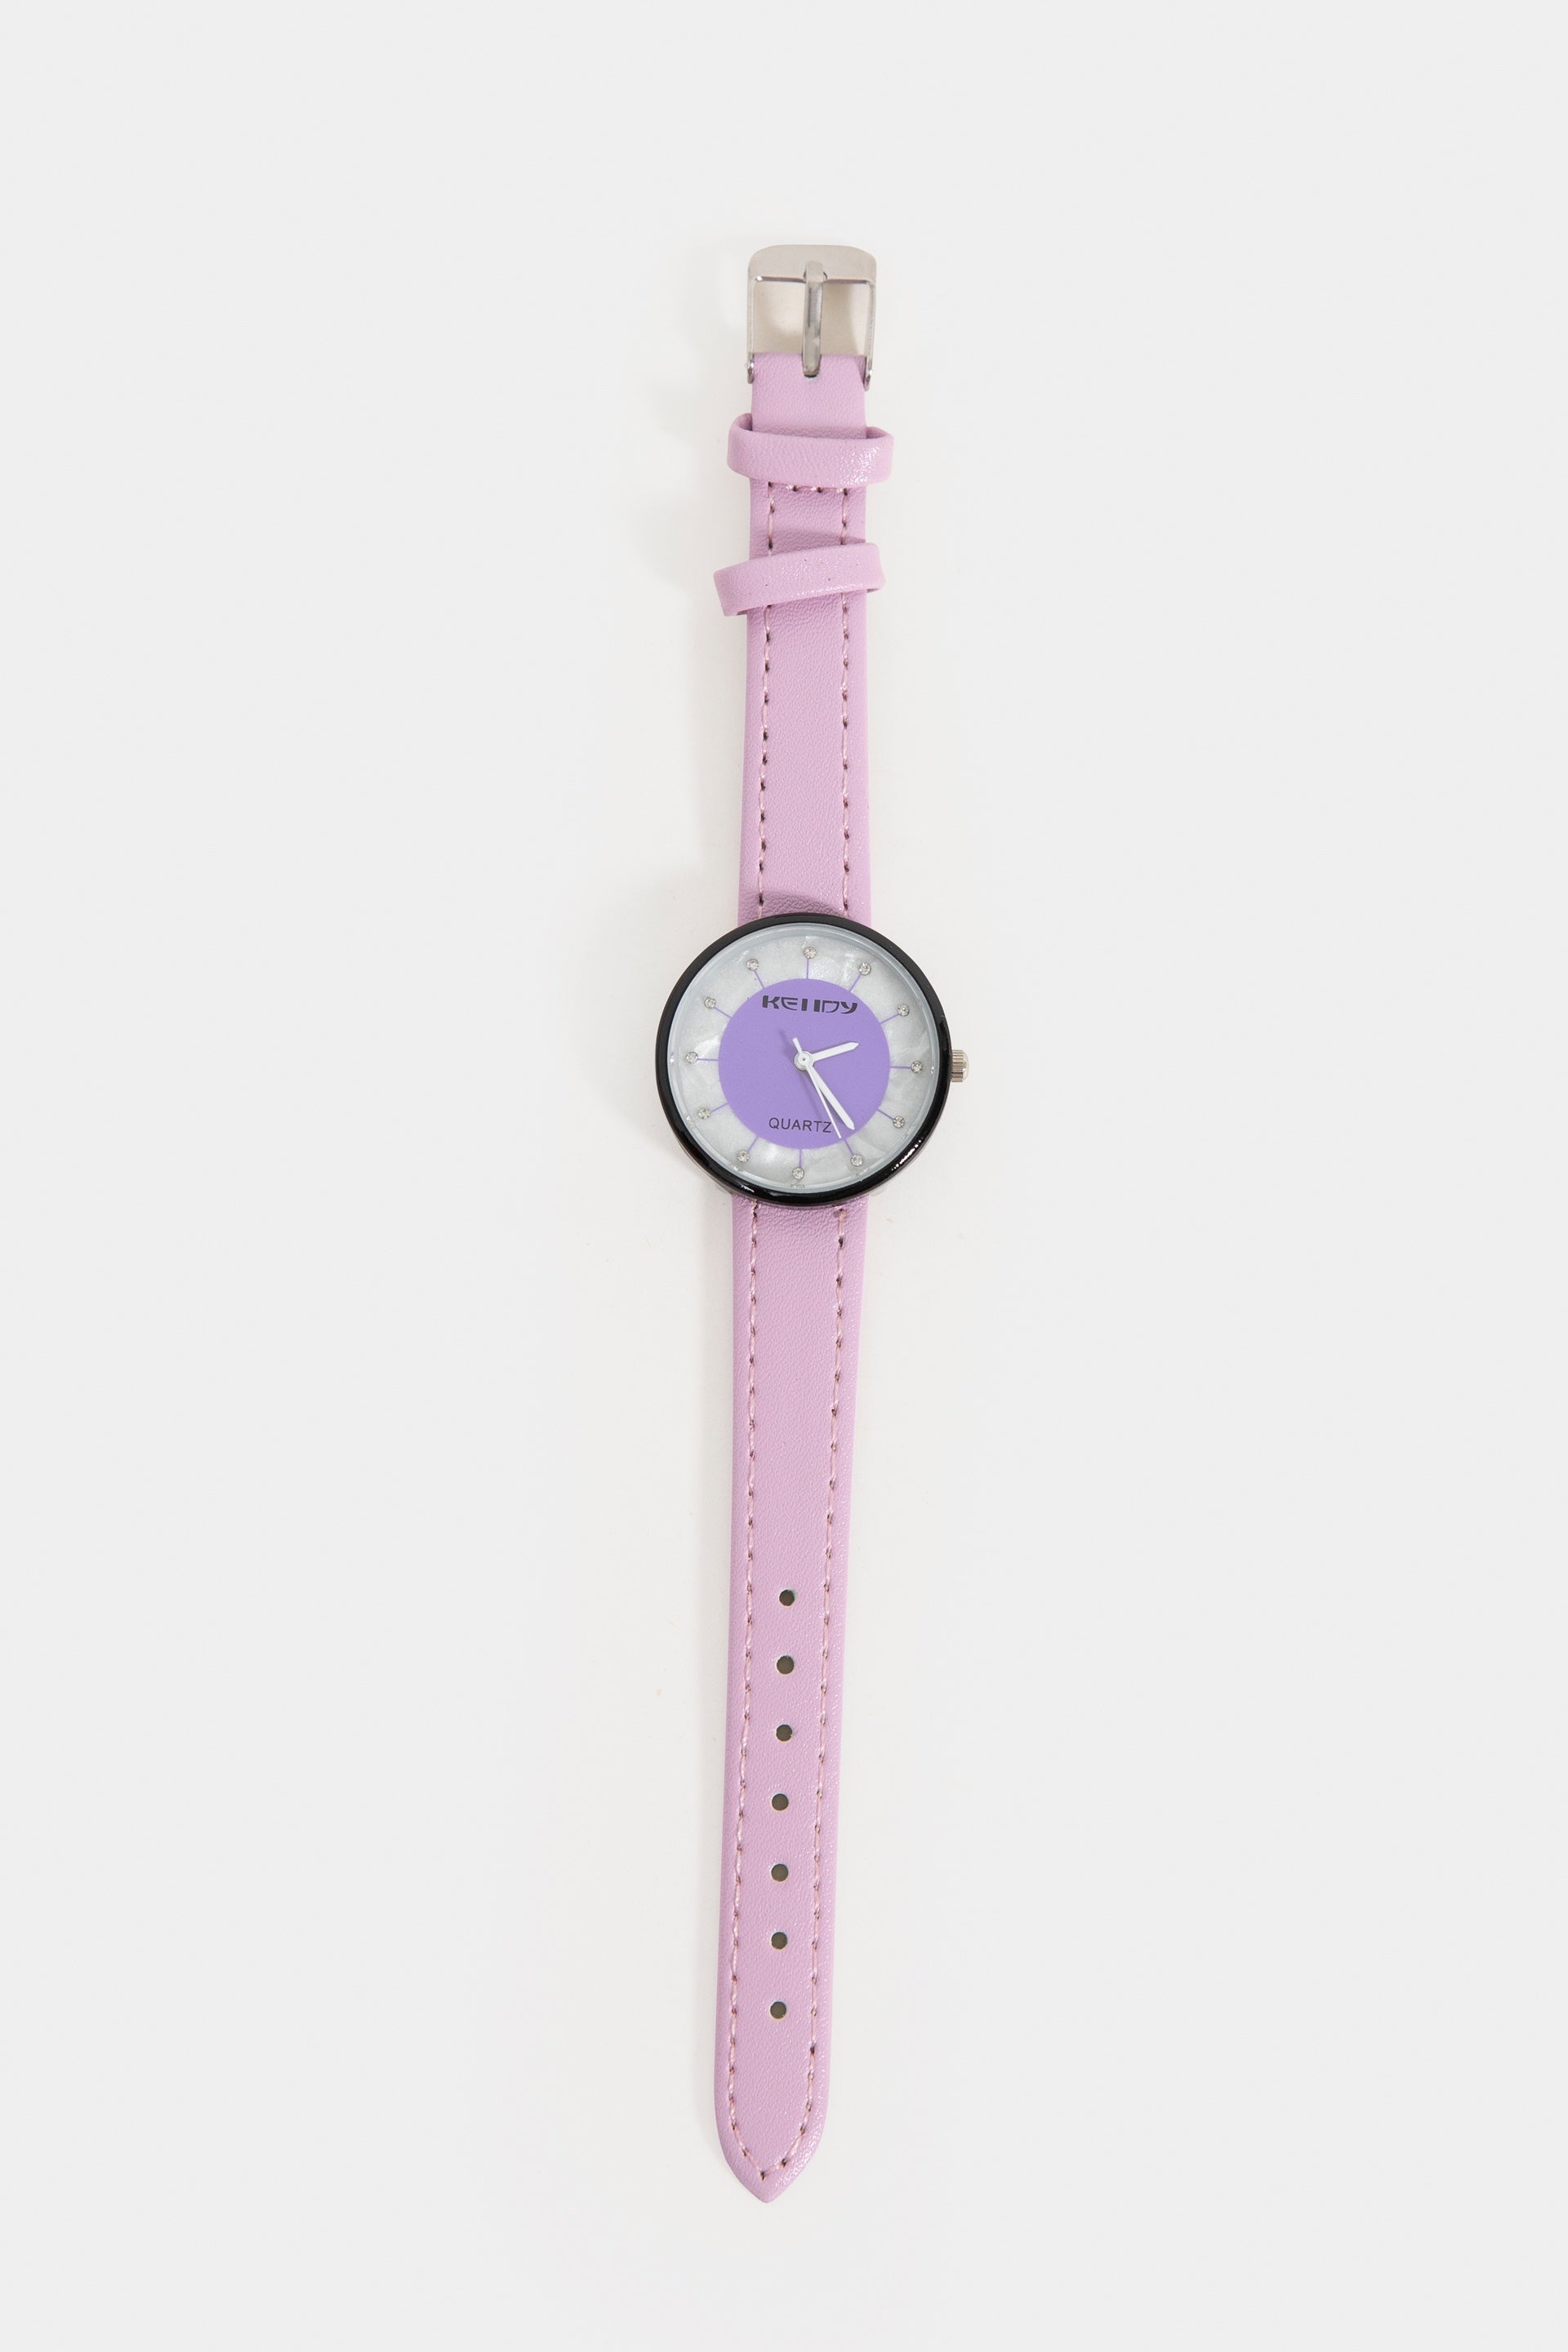 Classic Metal Round Watch | Urban Outfitters Mexico - Clothing, Music, Home  & Accessories